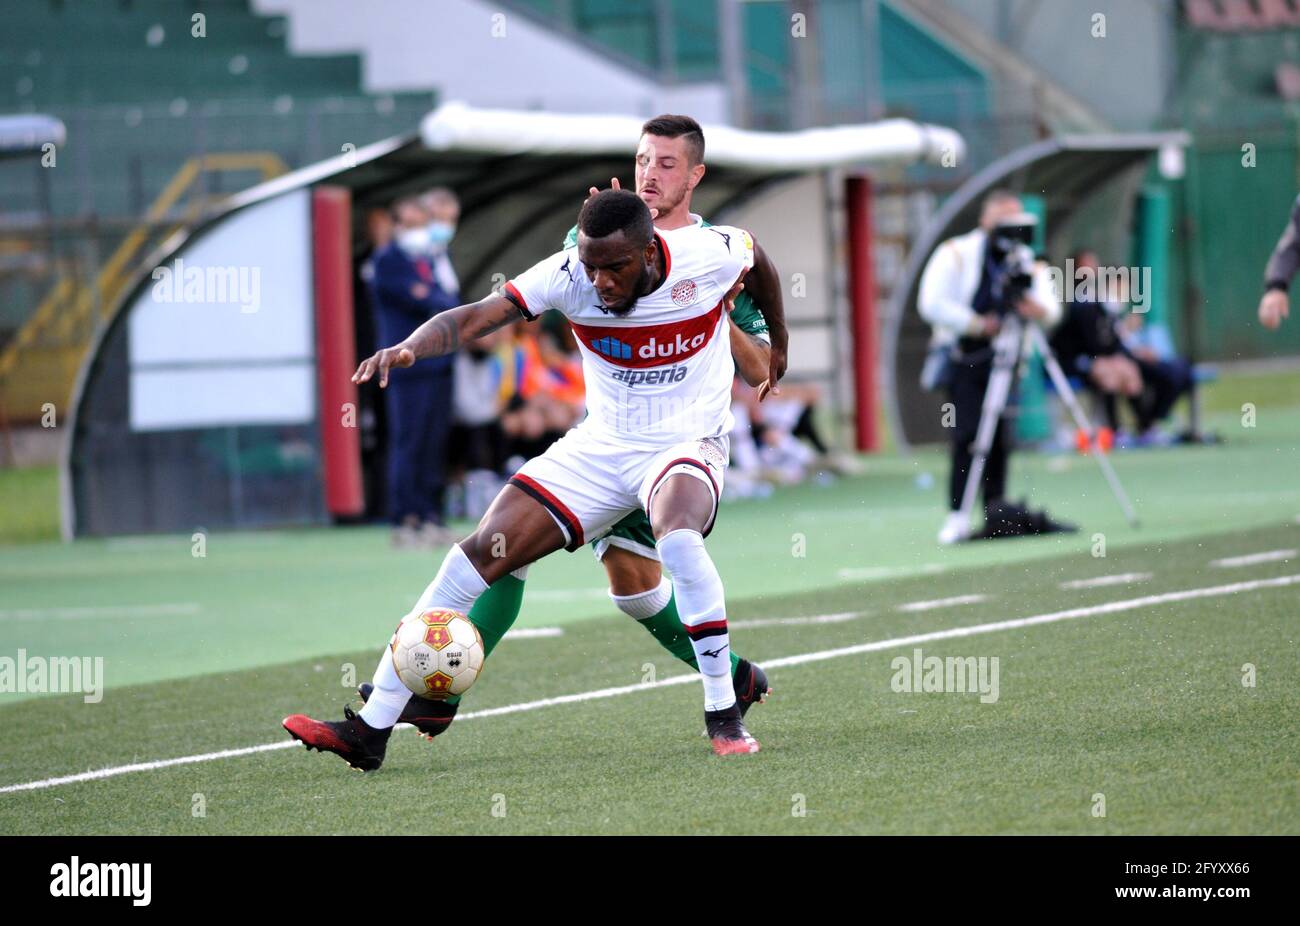 Avellino, Italy. 30th May, 2021. Kevin Venetot FC Sudtirol  during the Lega Pro Playoff match between US Avelino and FC Sudtirol at Partenio Adriano Lombardi stadium. Credit: Alessandro Pirone / Medialys Images / Alamy Live News Stock Photo